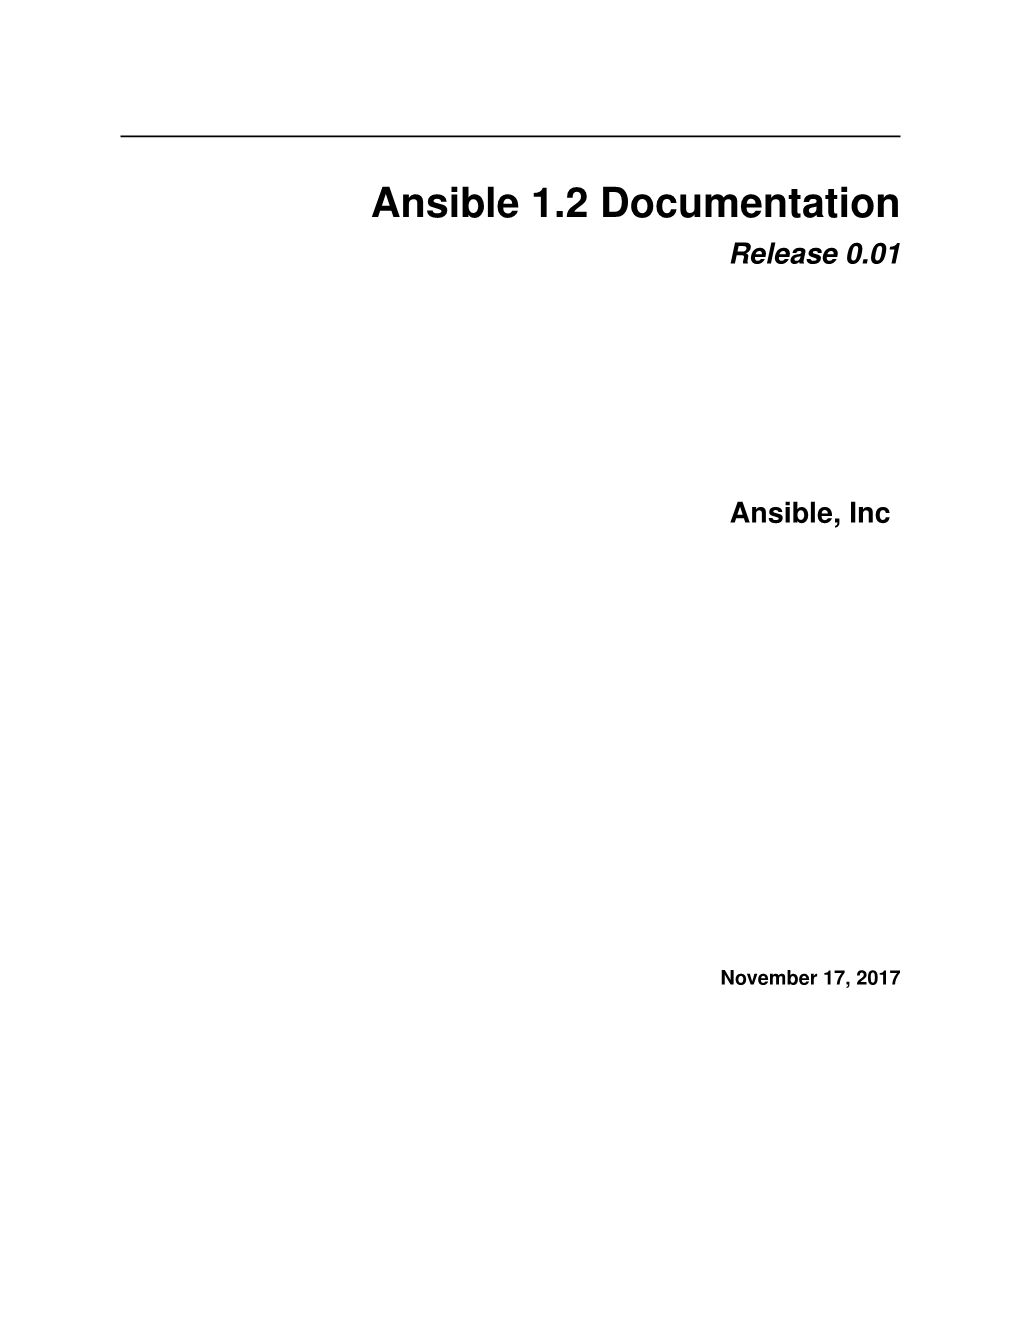 Ansible 1.2 Documentation Release 0.01